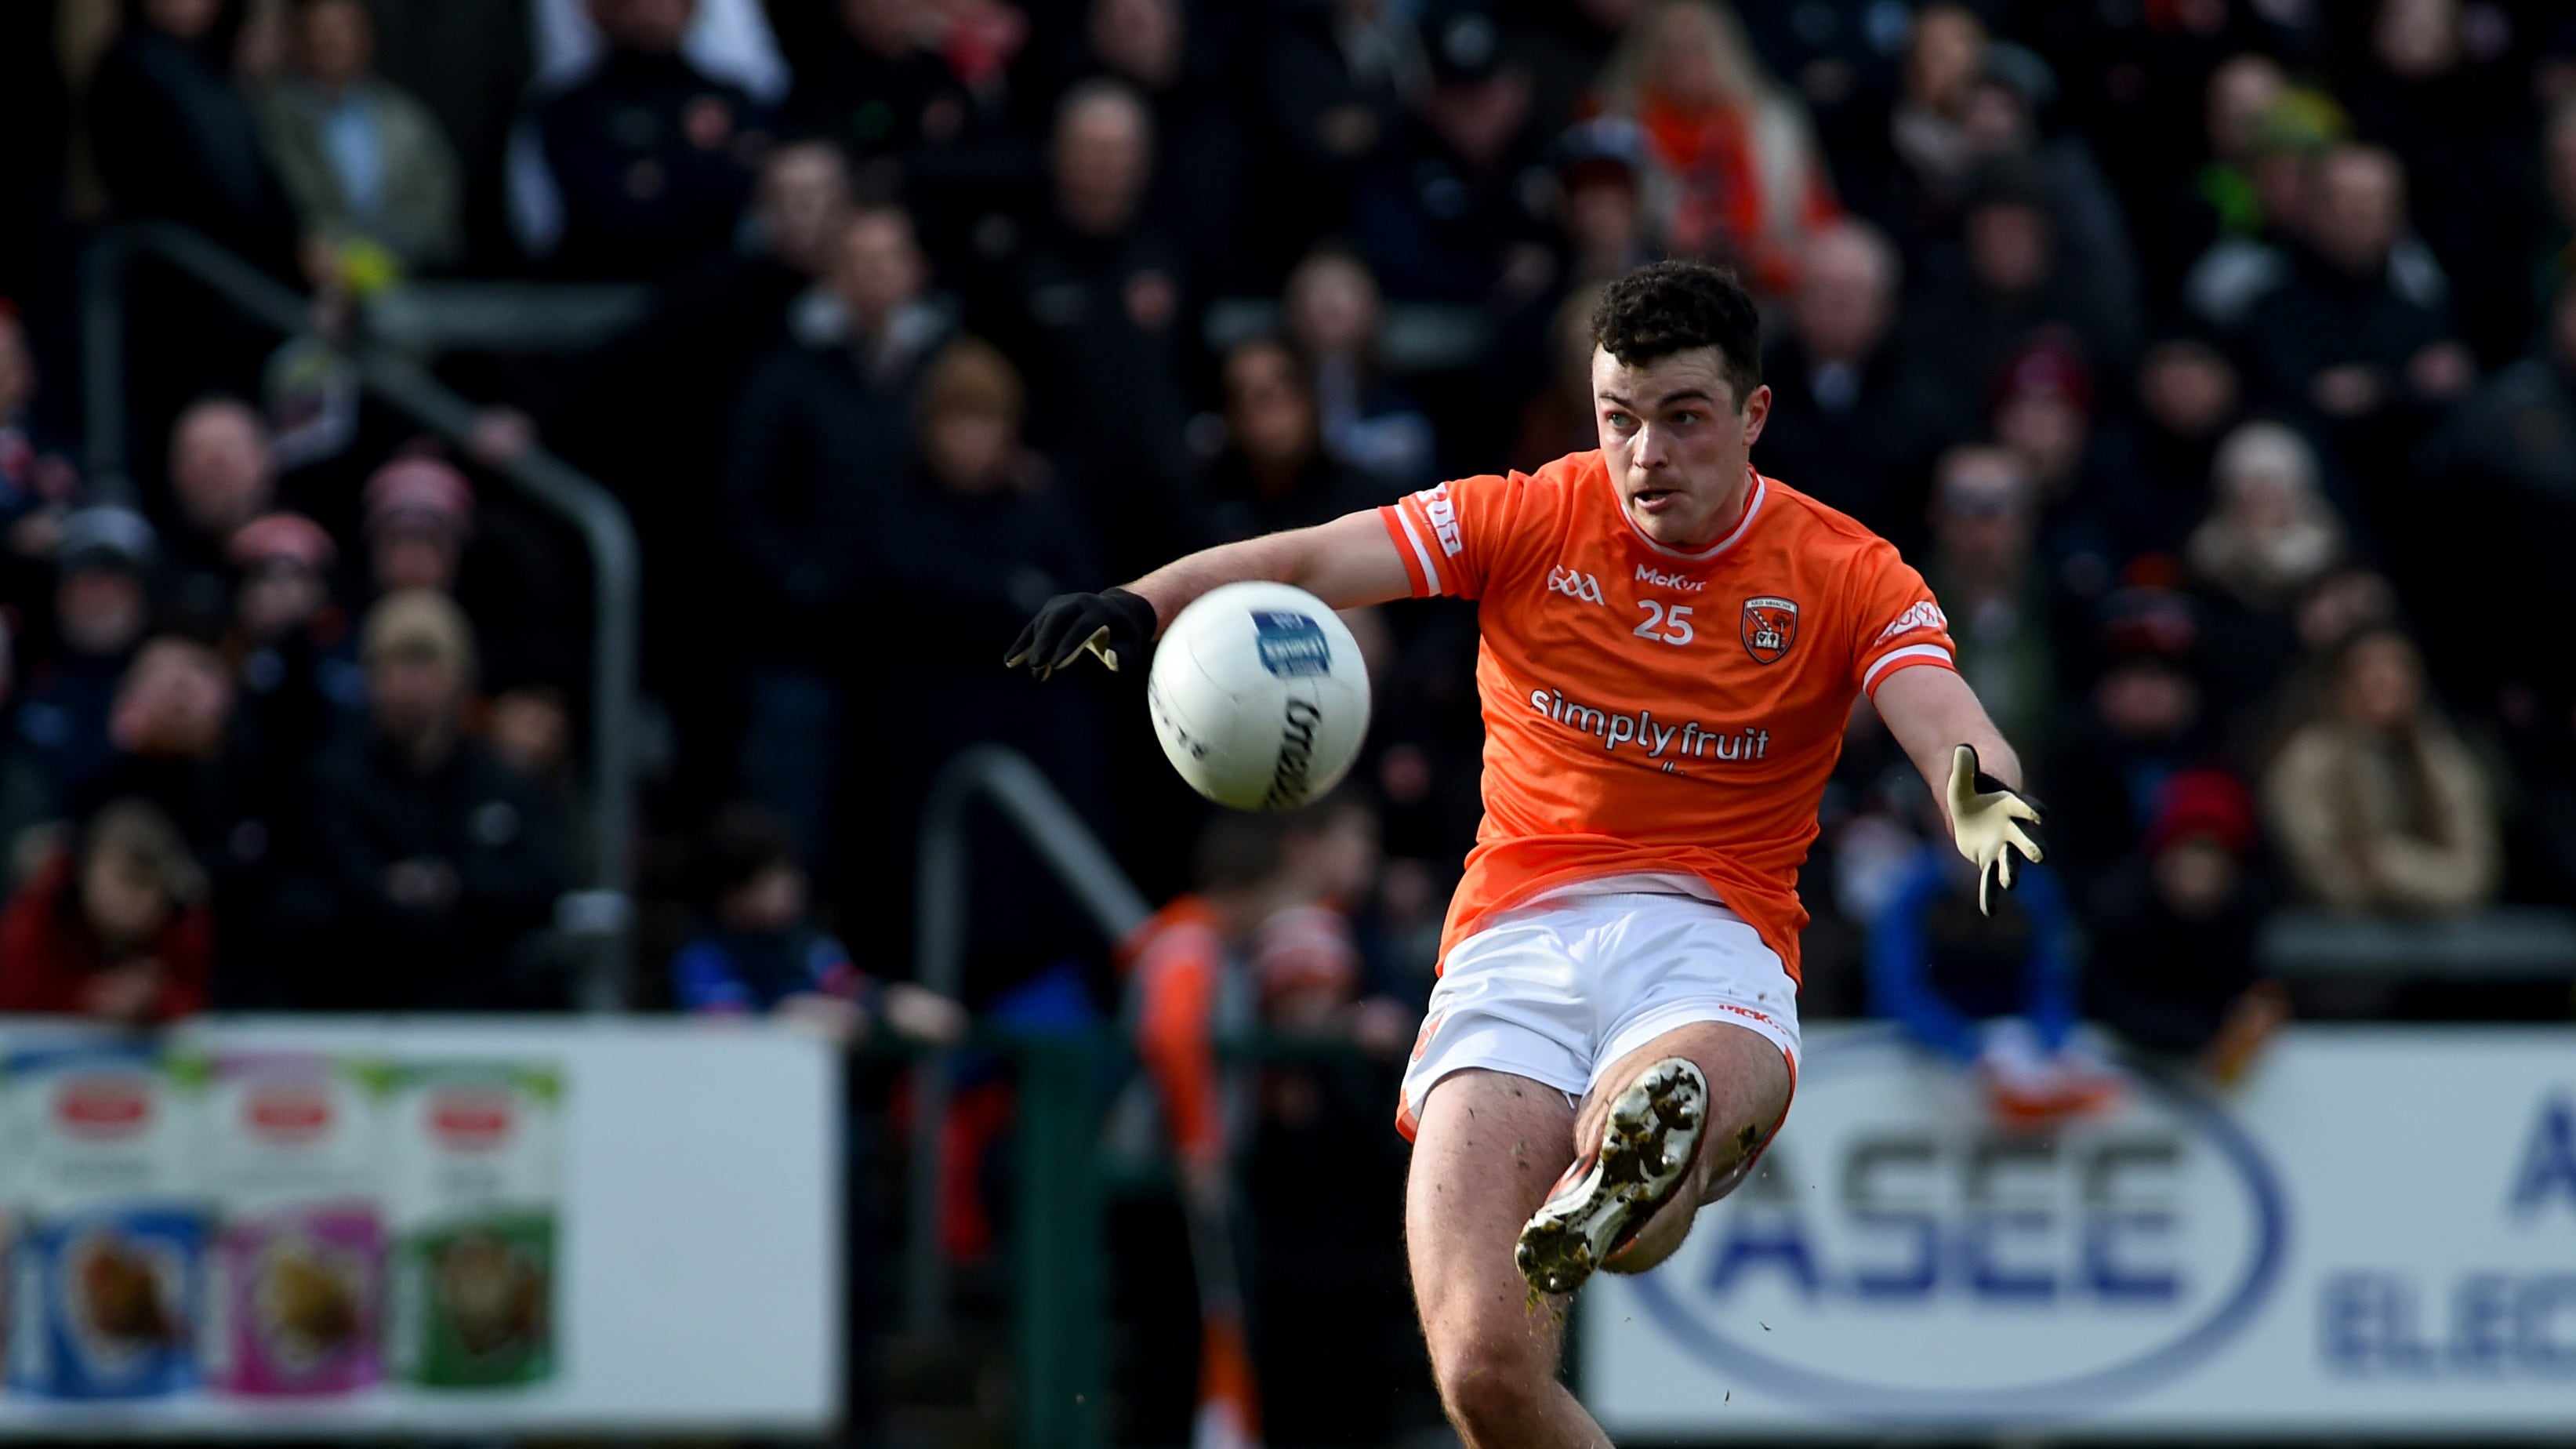 Conor O'Neill's season has been ruined by injury but he hopes to see Armagh go all the way